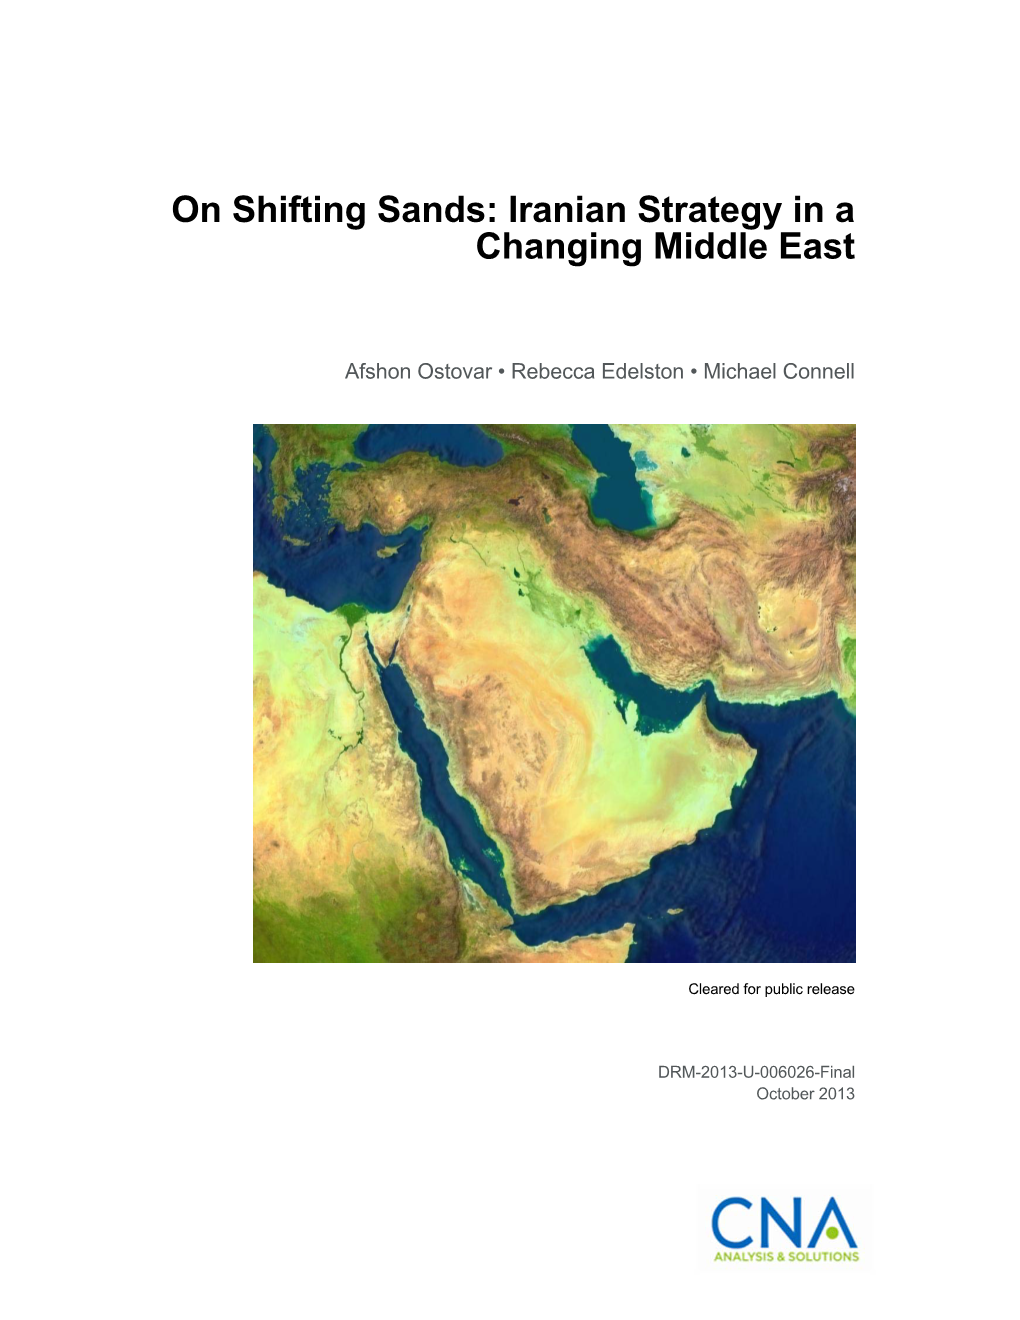 On Shifting Sands: Iranian Strategy in a Changing Middle East